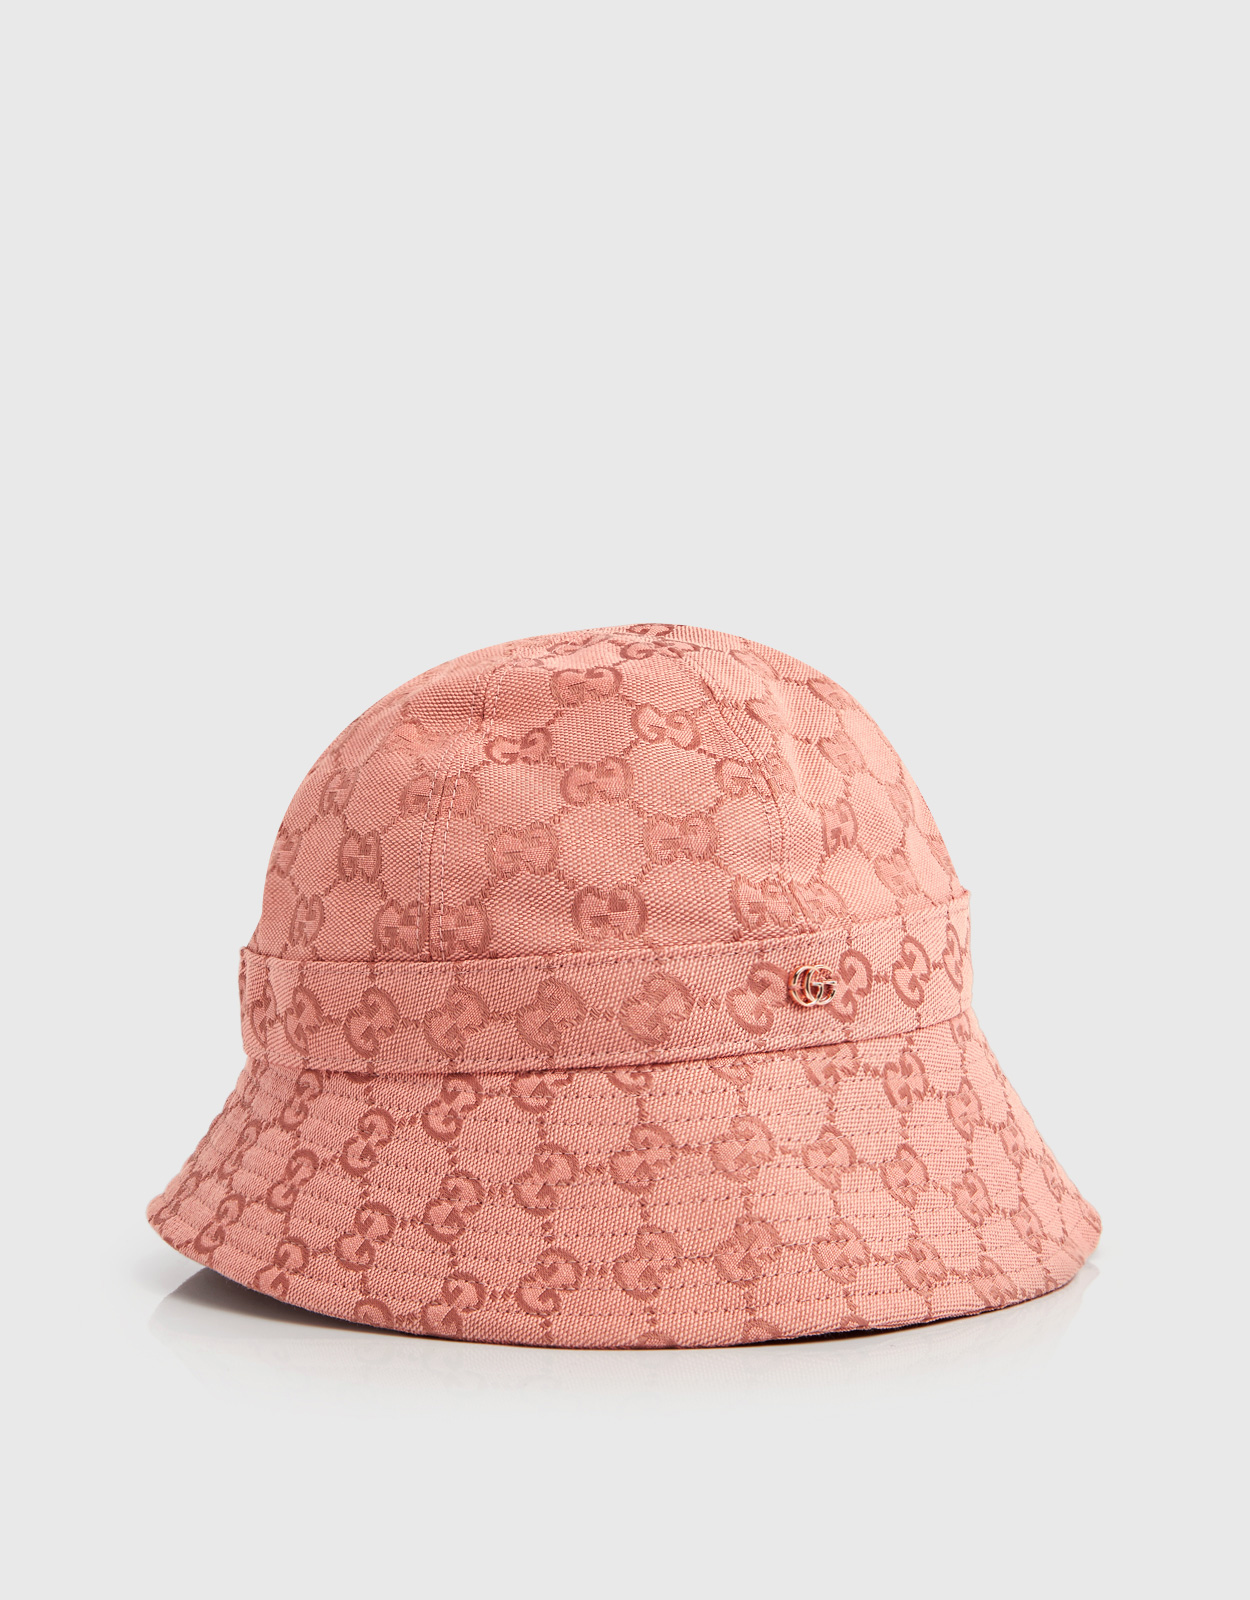 Gucci Canvas Bucket Hat with Double G Size M 58cm